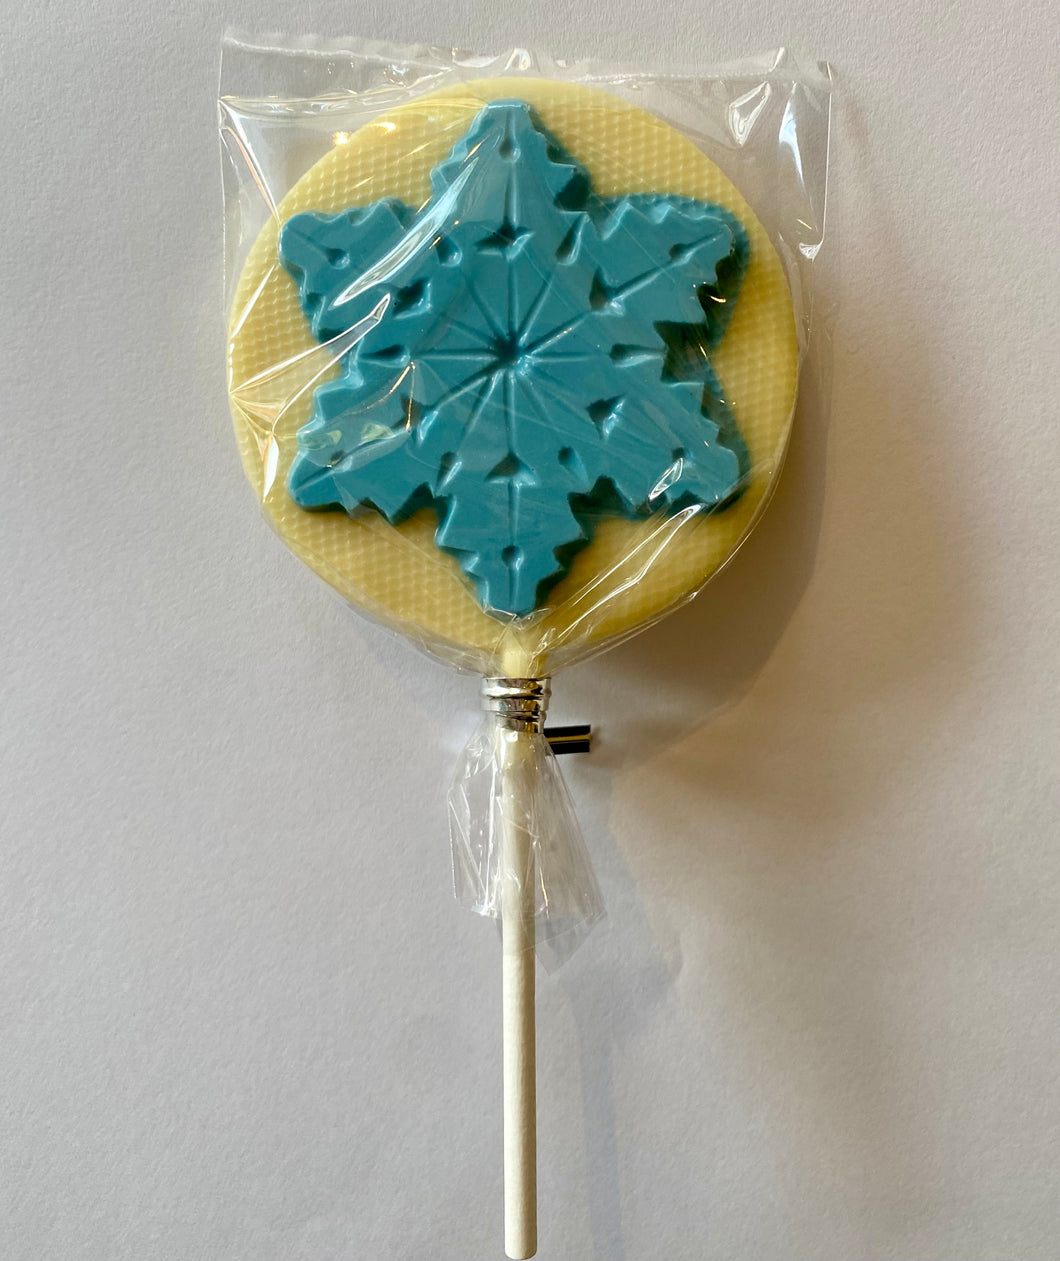 Snowflake Lolly